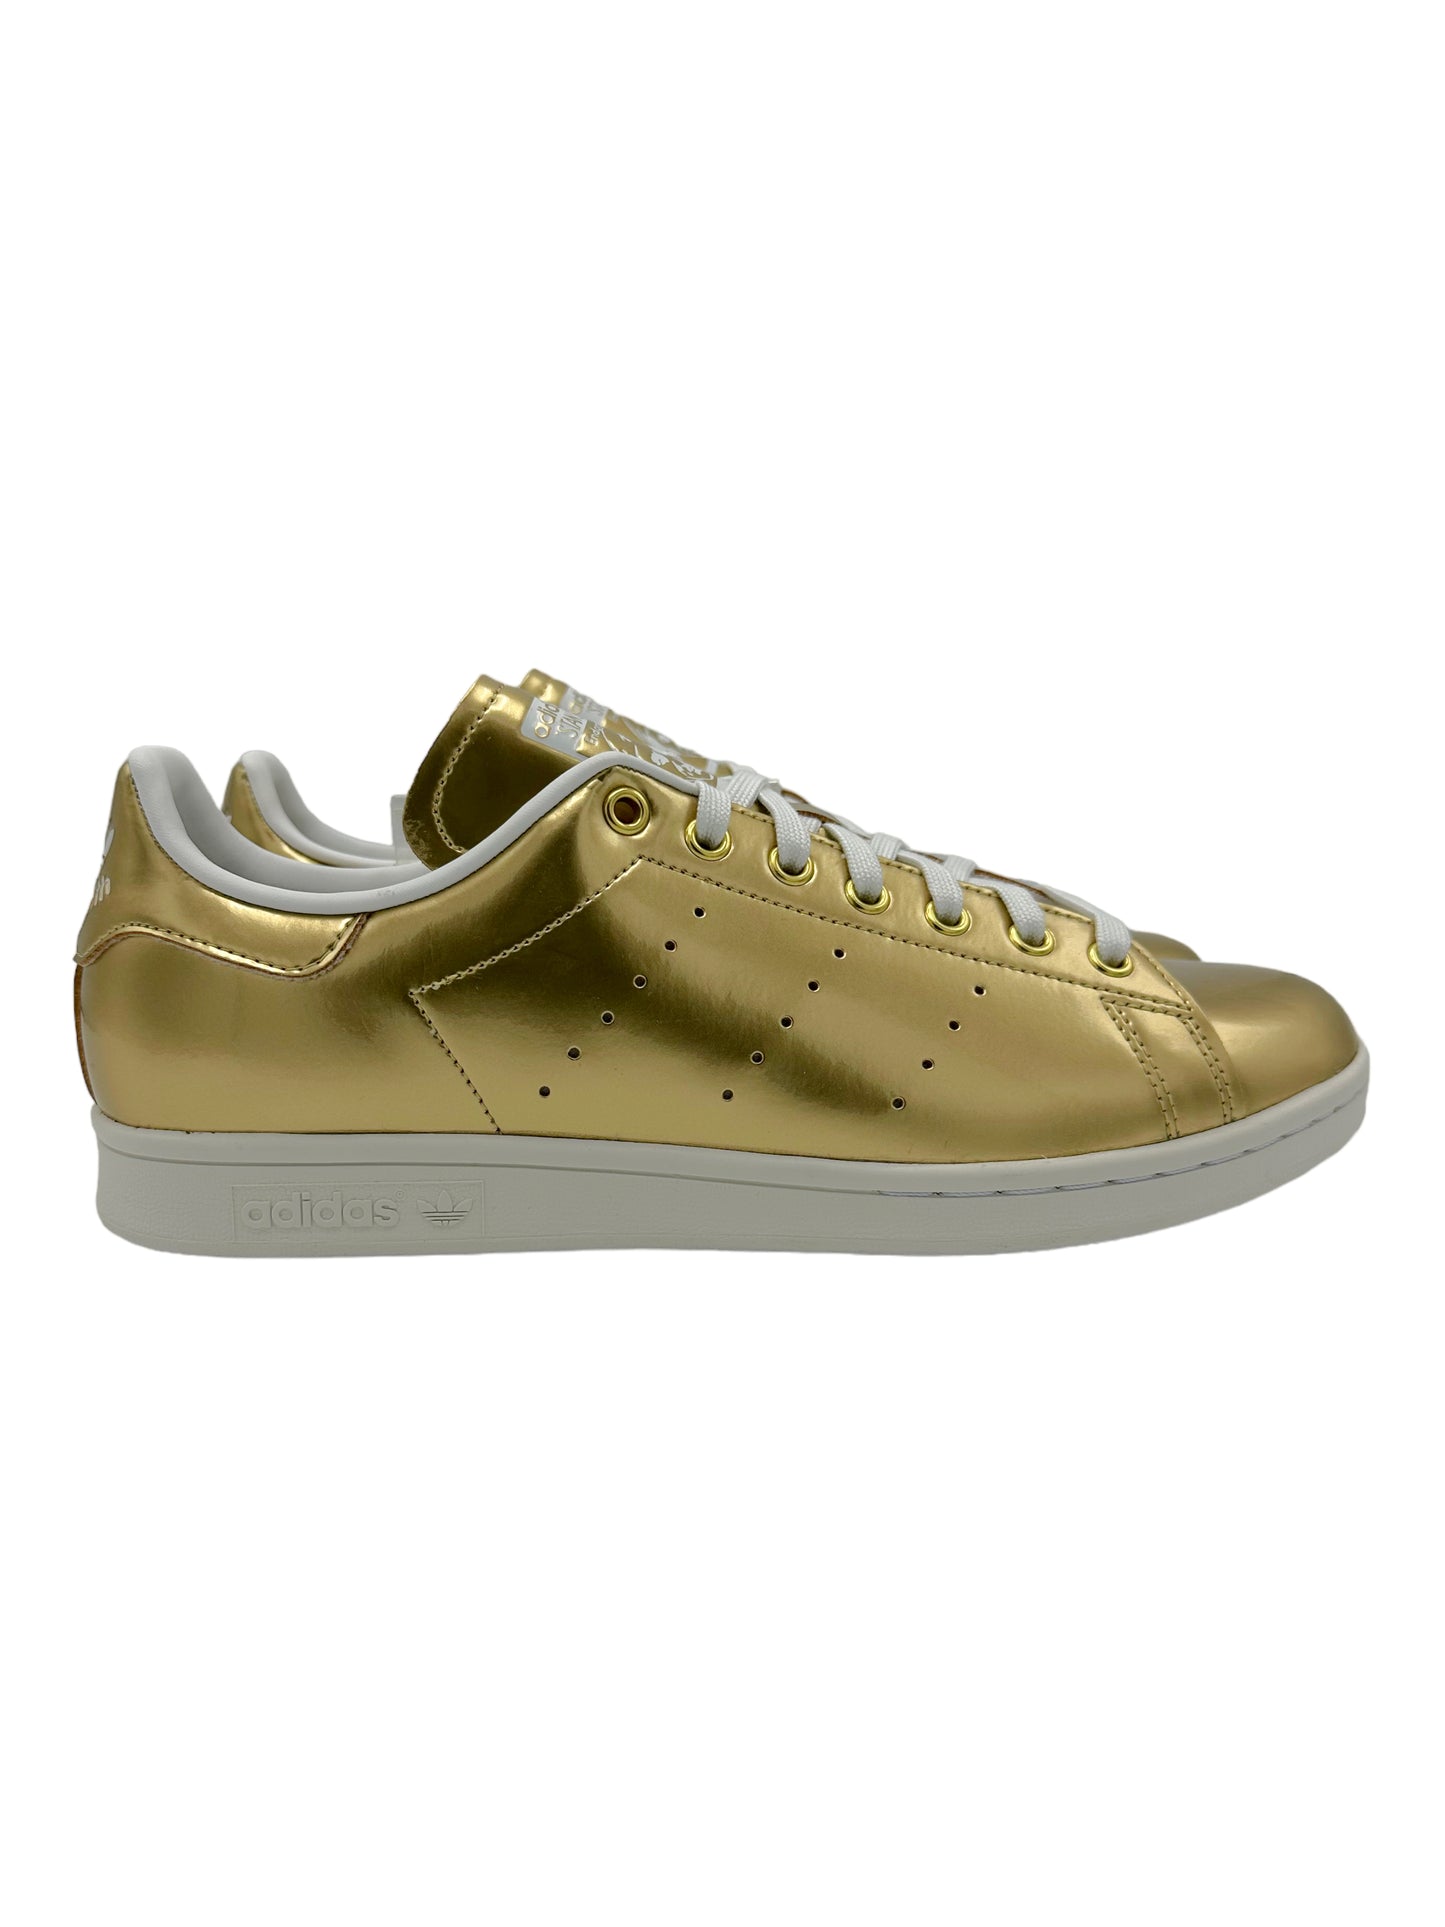 Adidas Stan Smith Metal Gold Metallic Sneakers - Genuine Design Luxury Consignment for Men. New & Pre-Owned Clothing, Shoes, & Accessories. Calgary, Canada